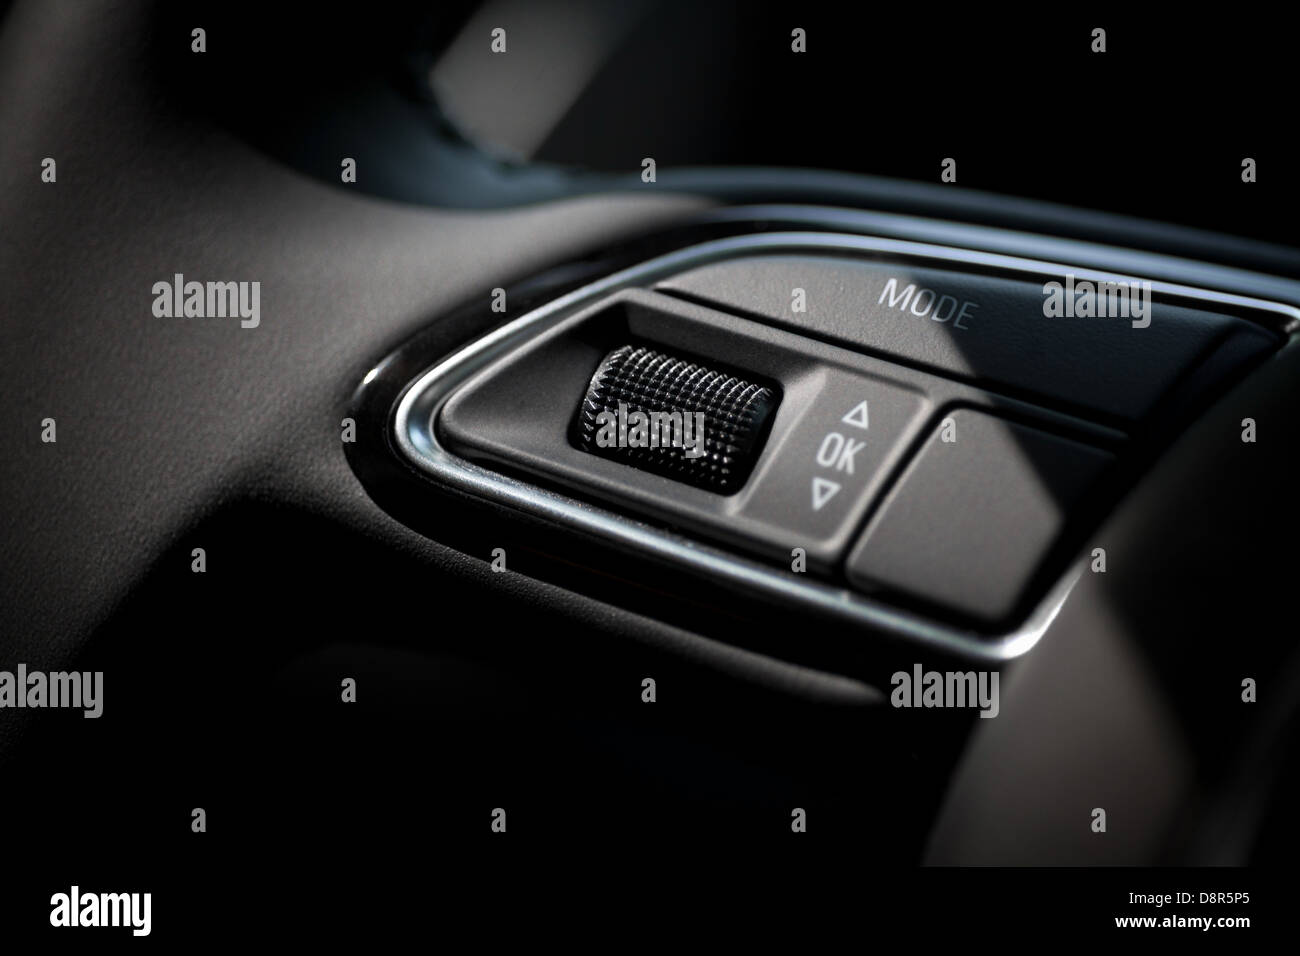 Detail on some buttons on a steering wheel Stock Photo